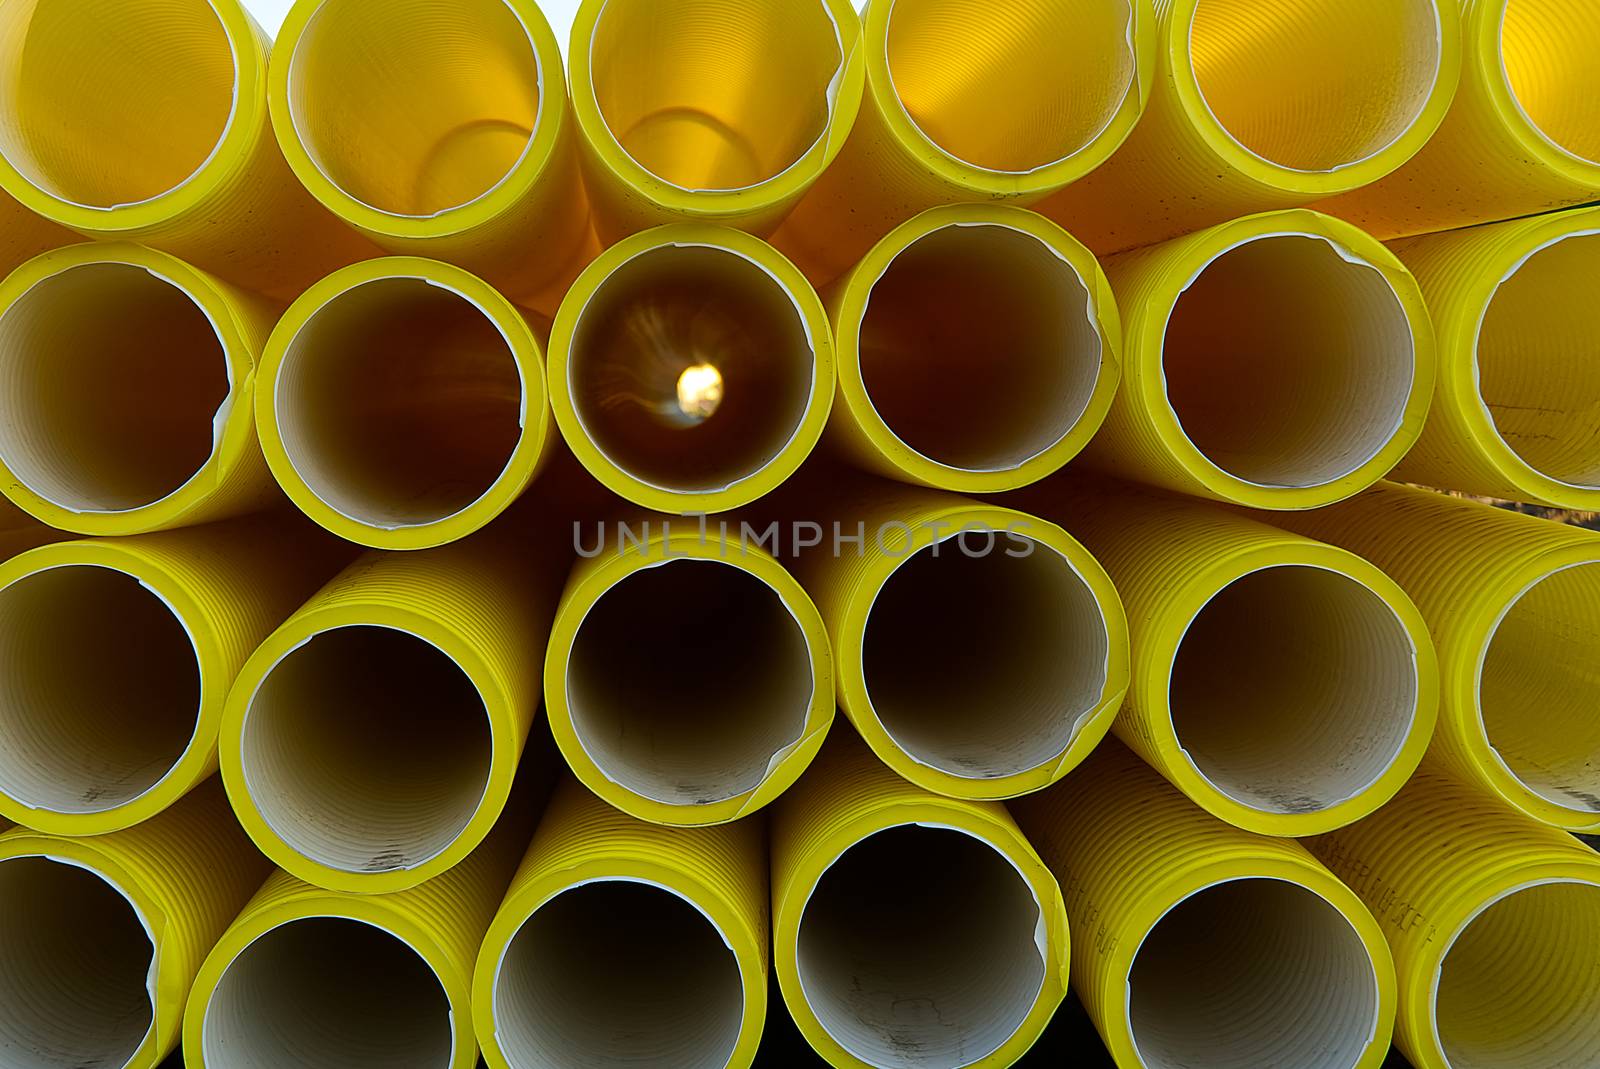 yellow plastic pipes for laying electricity cables underground. texture or abstract background. by PhotoTime